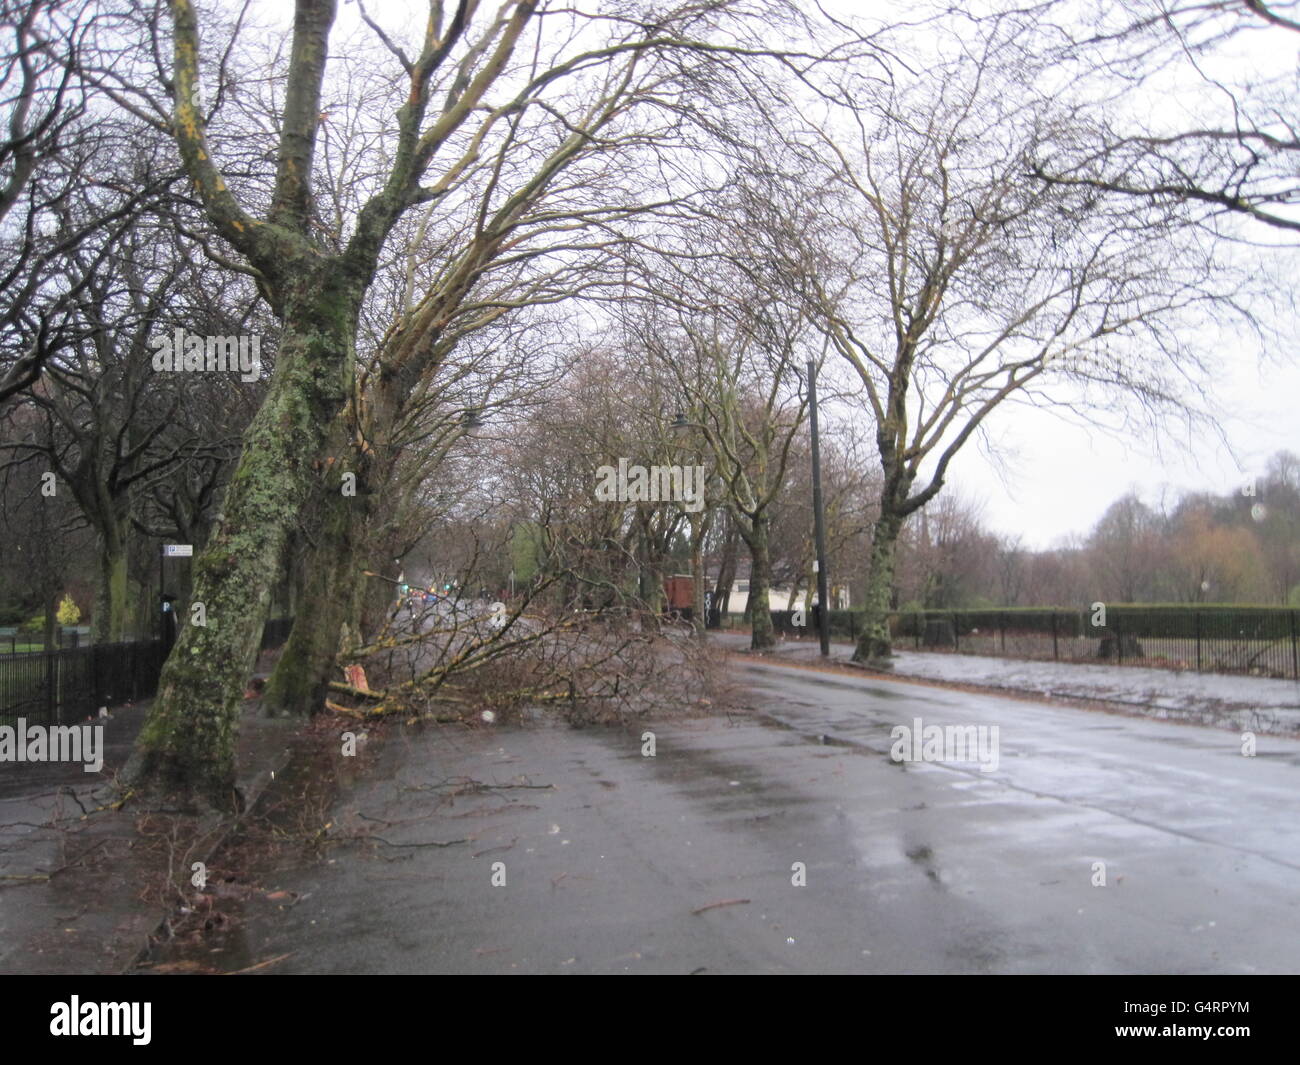 Storm damage on Kelvin Way in Glasgow, as parts of Scotland were placed on red alert today as 100mph winds and heavy rain lashed the country, damaging buildings and bringing severe disruption to the transport network. Stock Photo